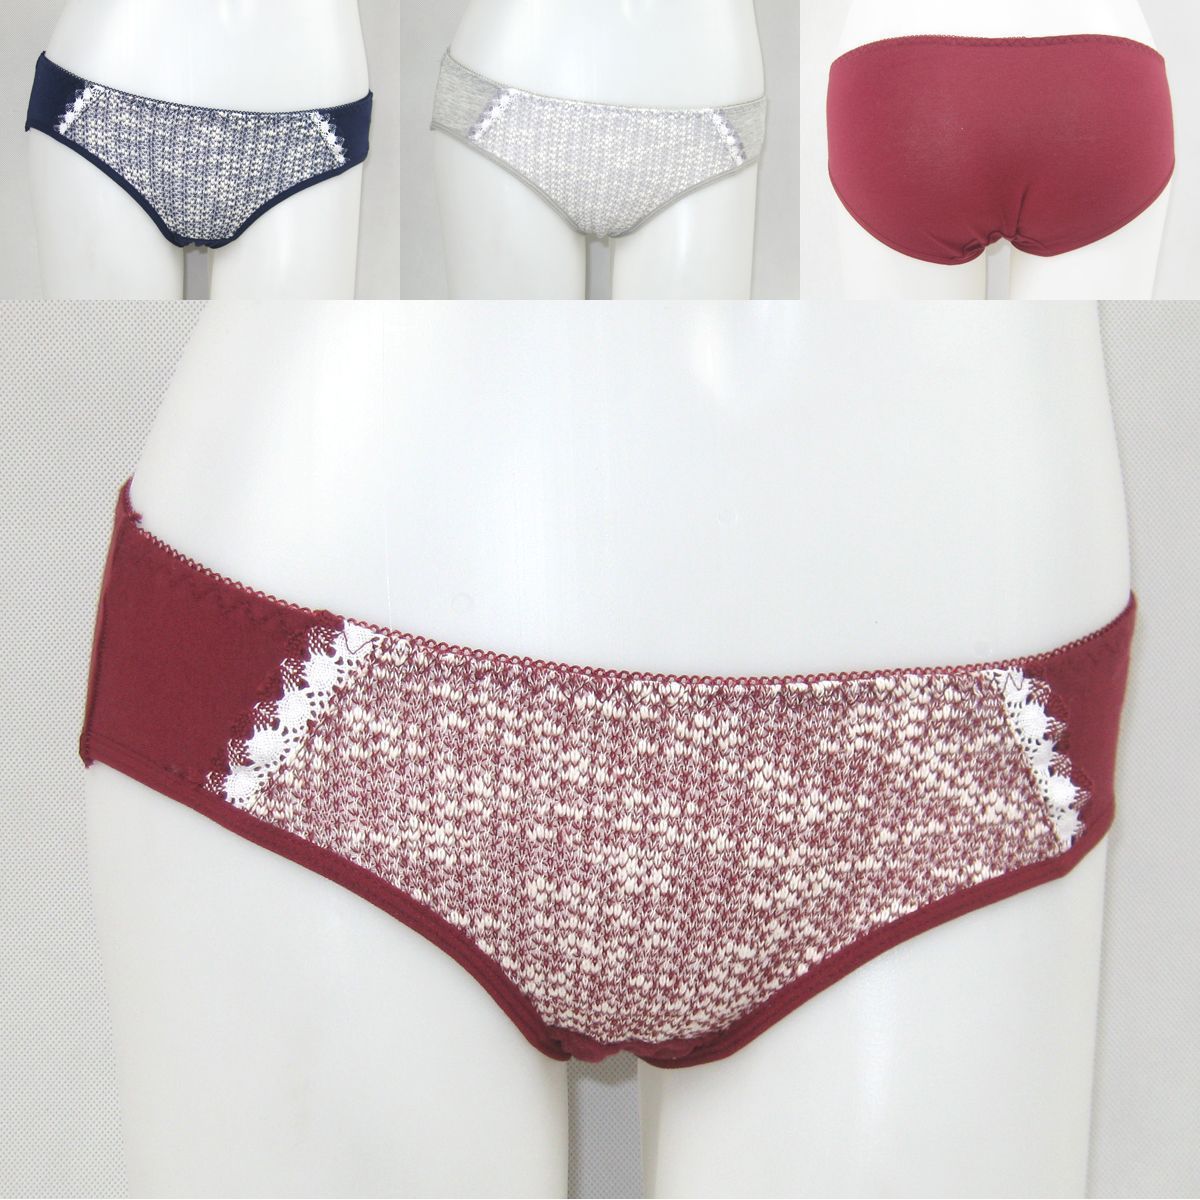 2124 # melting yarn crochet low - rise cotton underwear fake sweater design ladies sometimes called tighty whities they